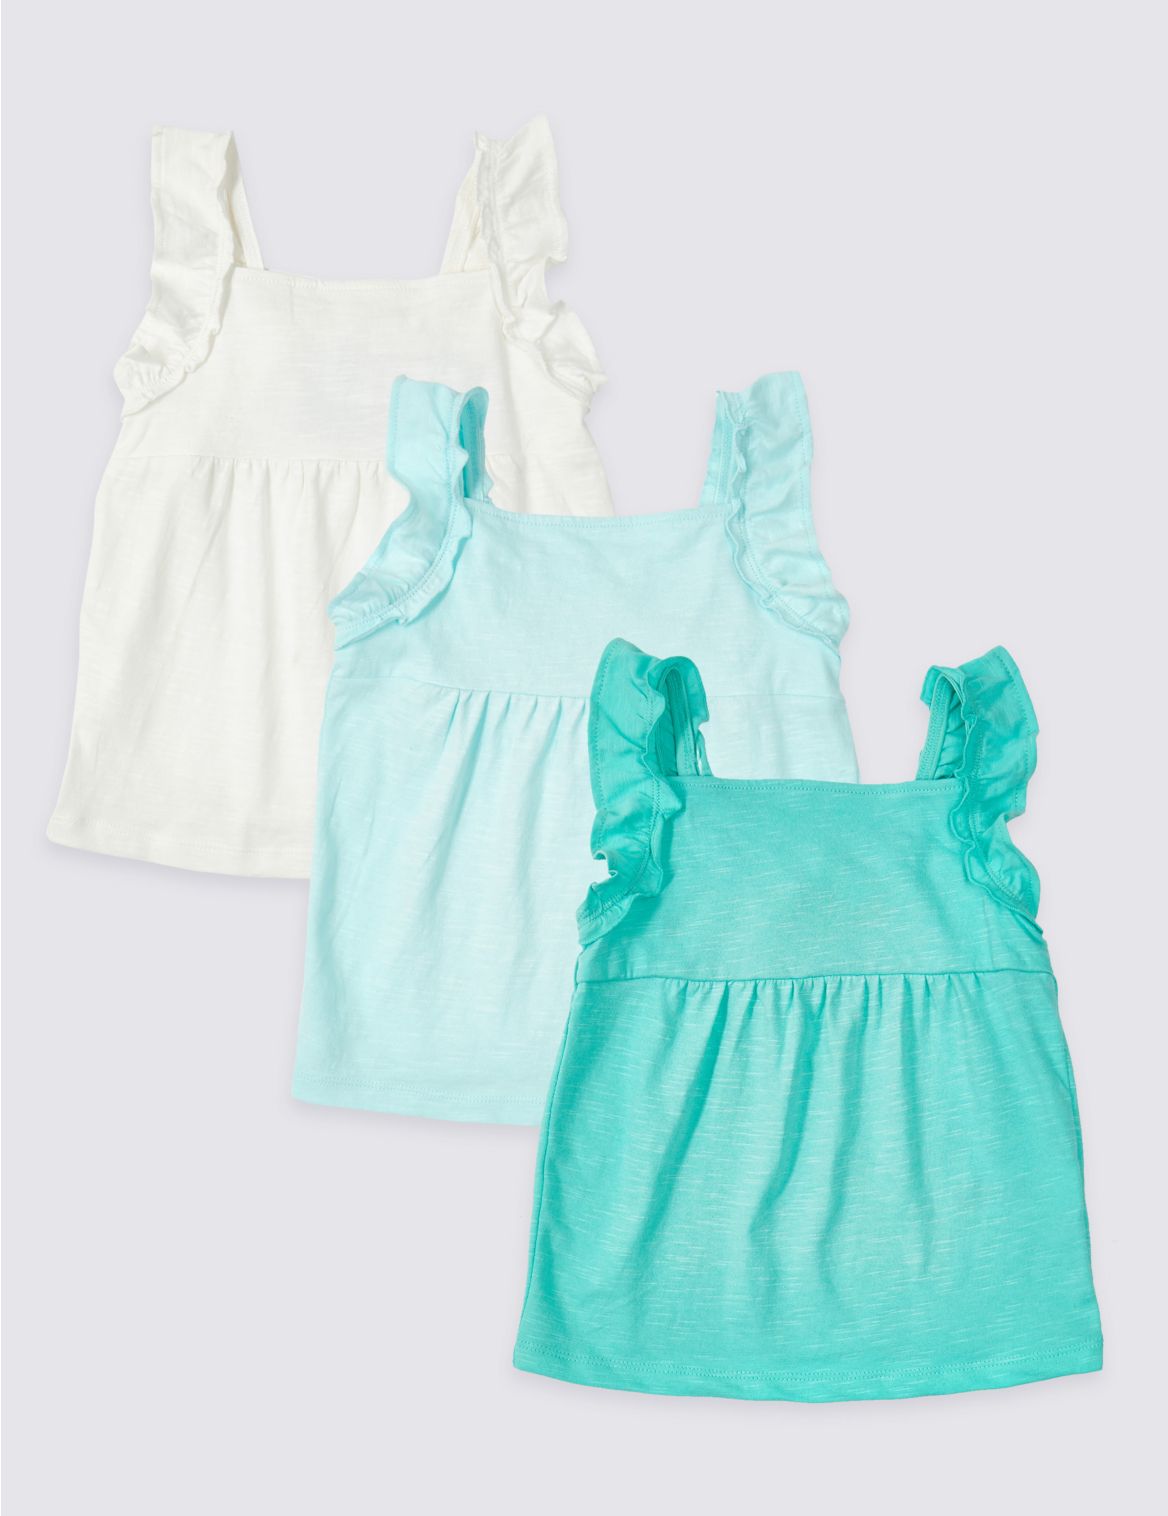 Ribbons & Booties: My Favorites from Recent Marks & Spencer's Kids ...